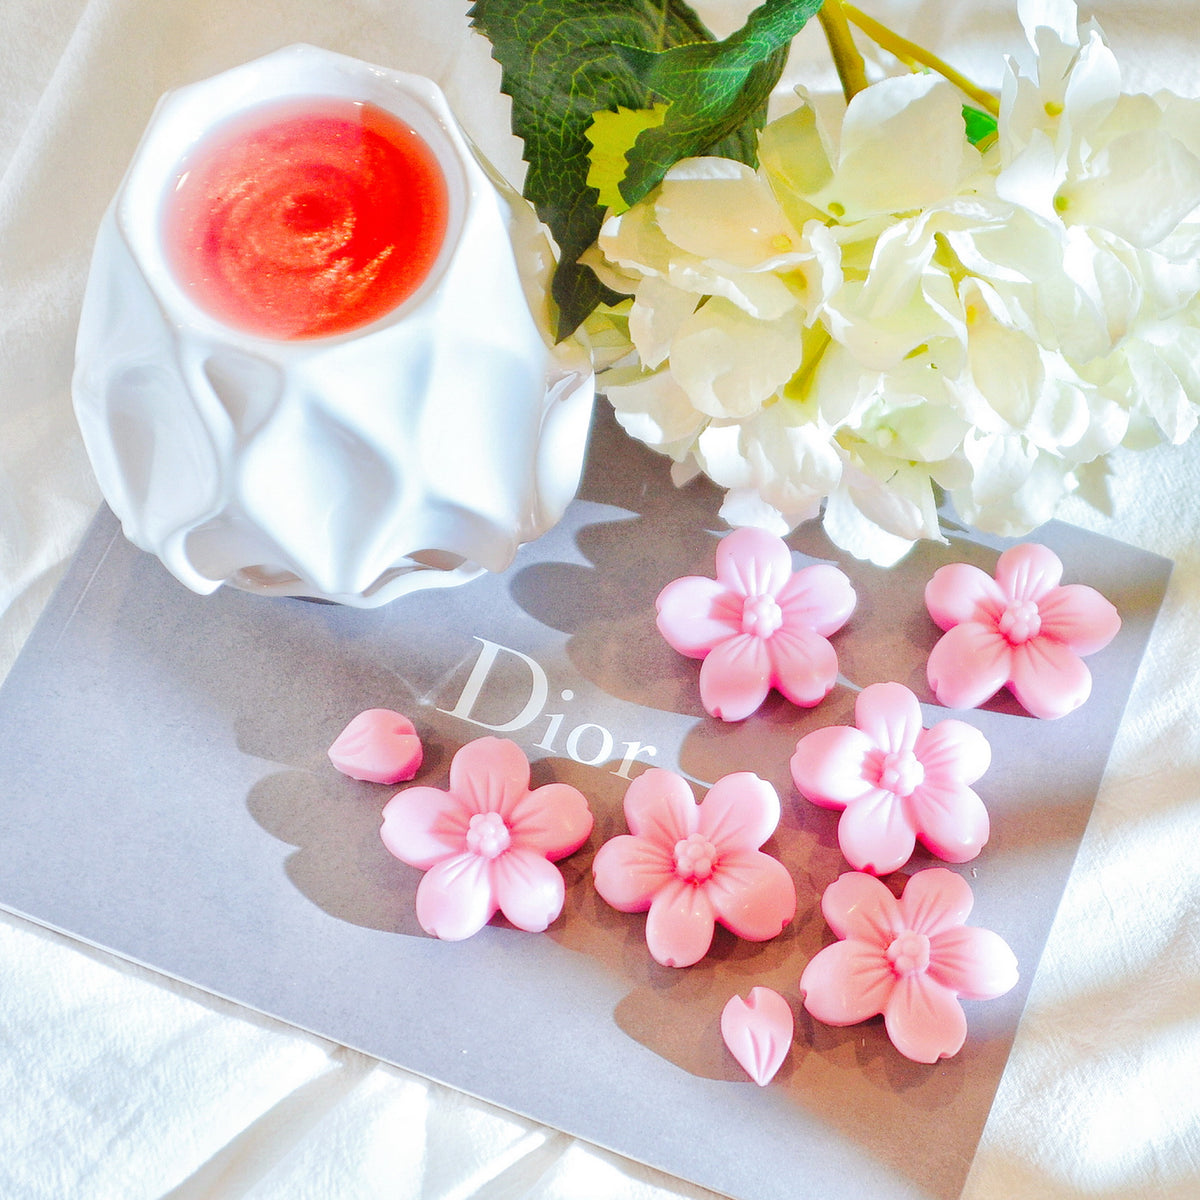 Highly Scented Cherry Blossom Soy Wax Melts | Handmade Soy Wax Tarts | LMJ Candles